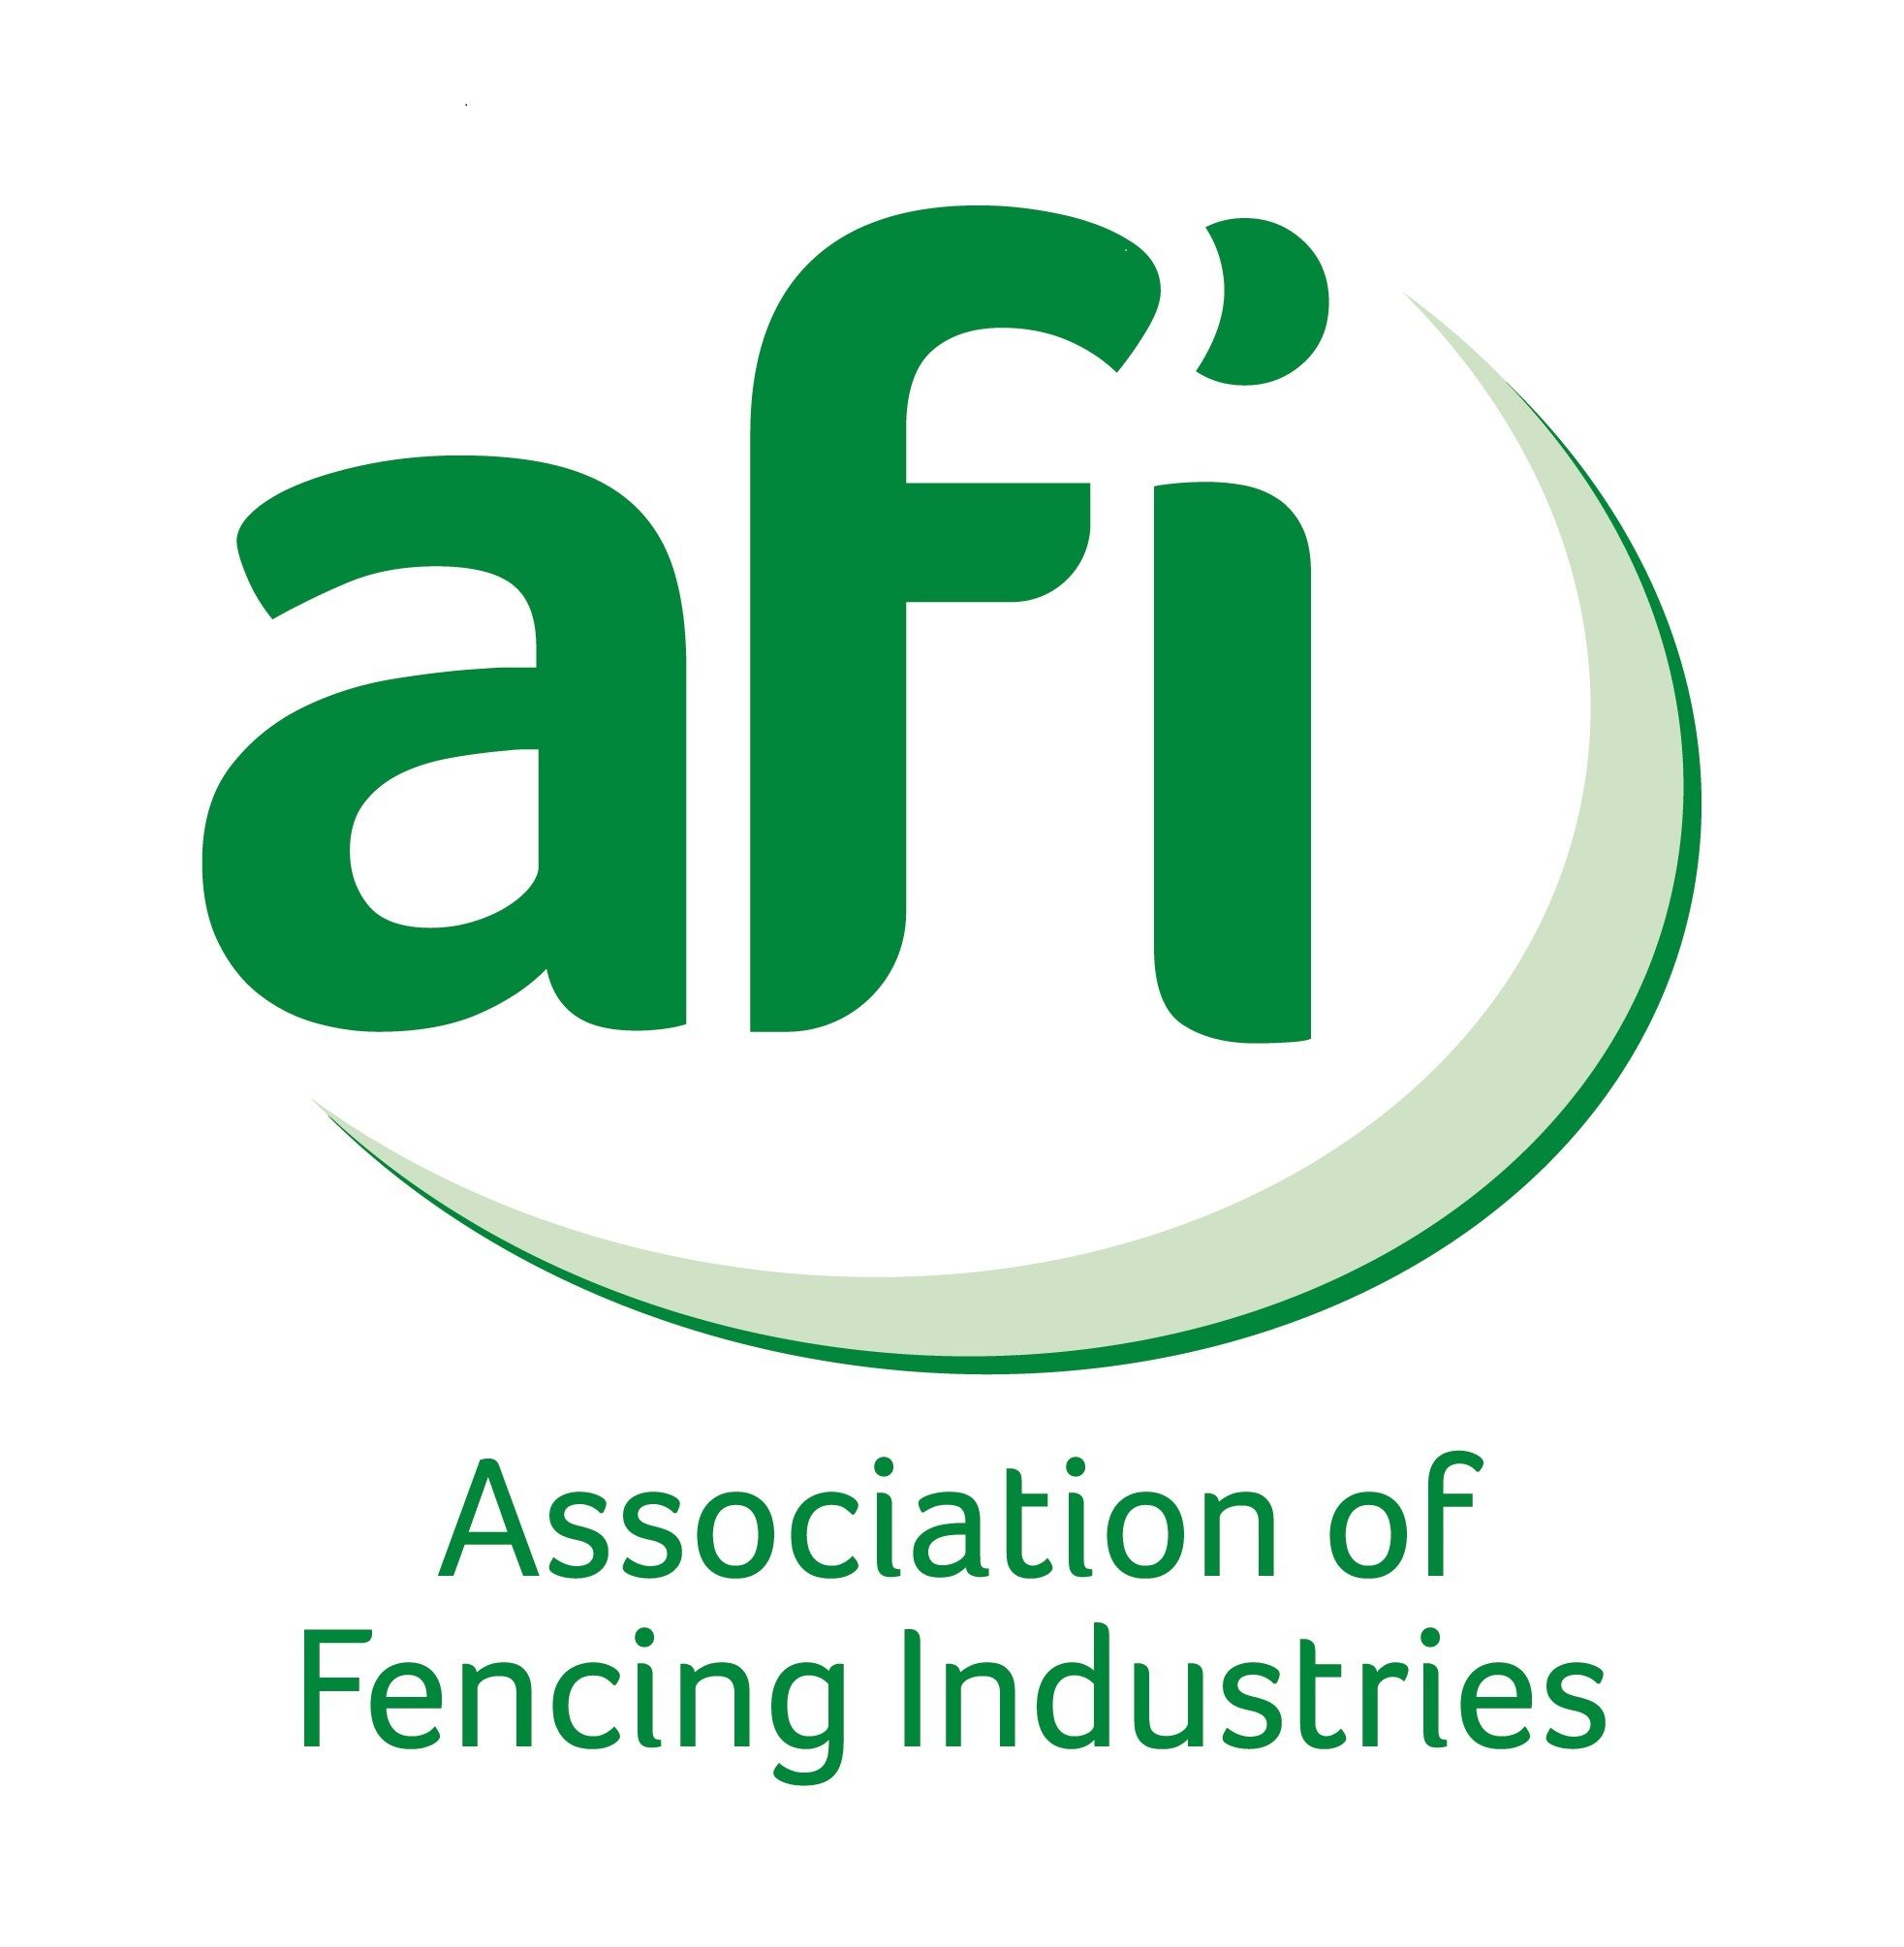 Association of Fencing Industries